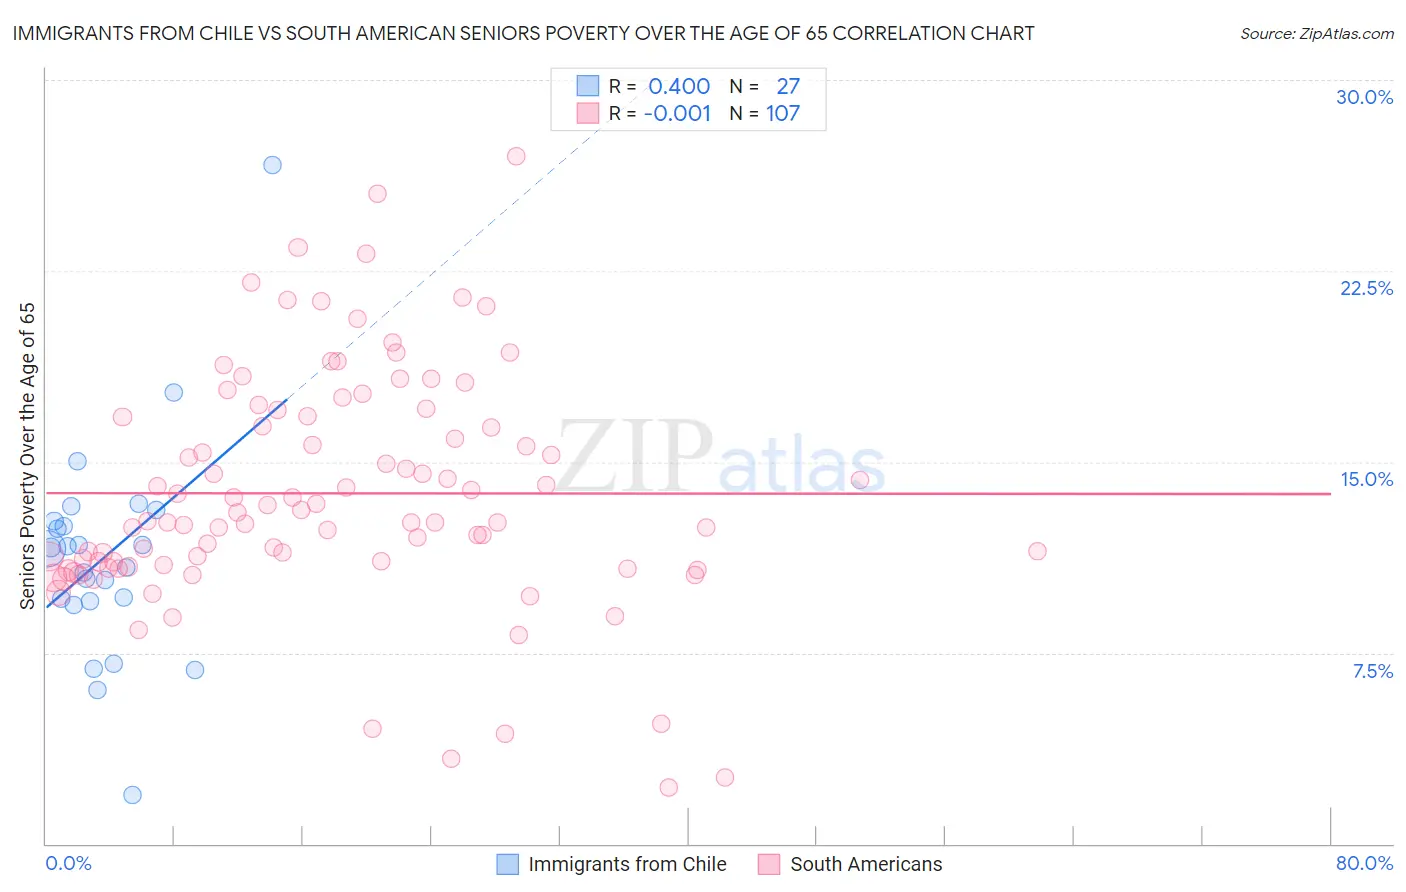 Immigrants from Chile vs South American Seniors Poverty Over the Age of 65